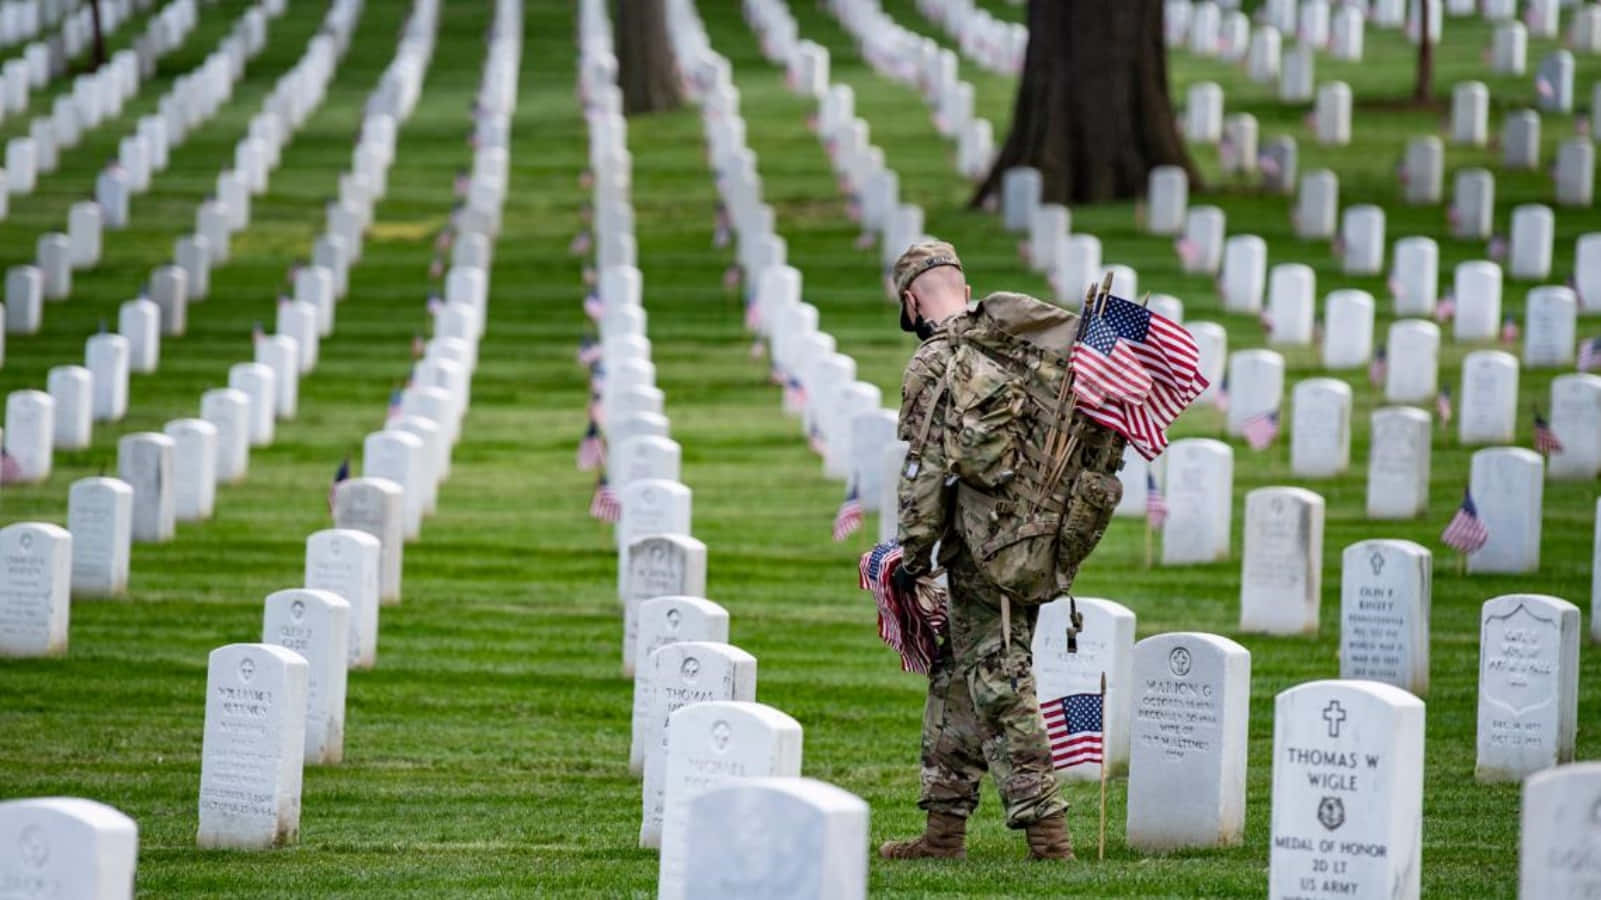 Honor the brave men and women who defended our country this Memorial Day